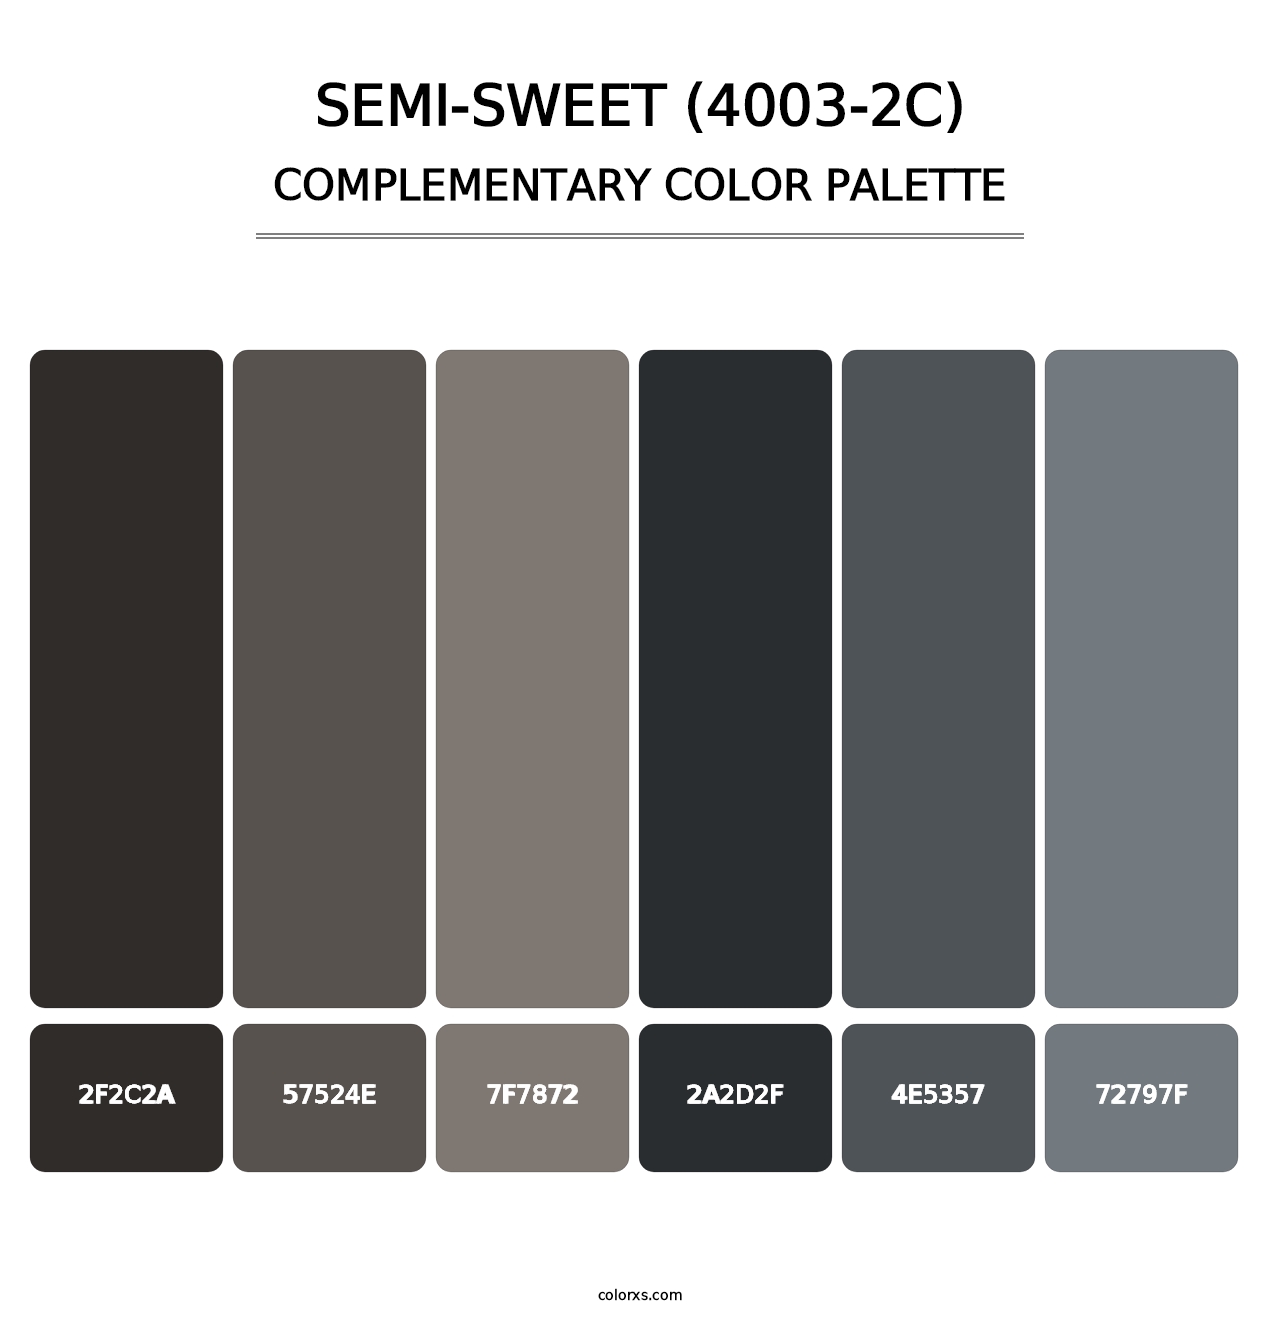 Semi-Sweet (4003-2C) - Complementary Color Palette